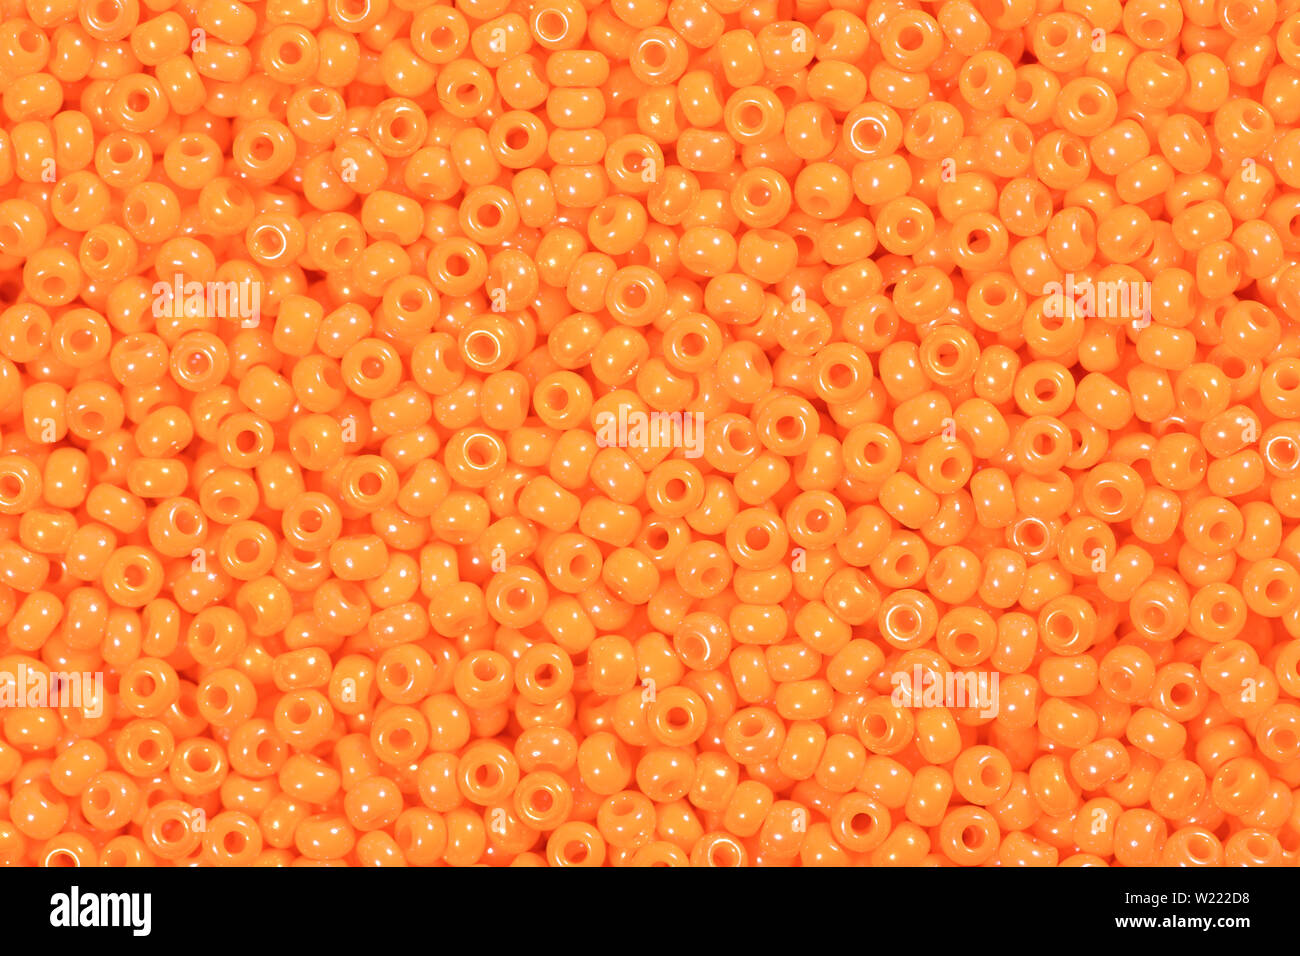 Bright orange seed beads. High quality texture in extremely high resolution. Stock Photo